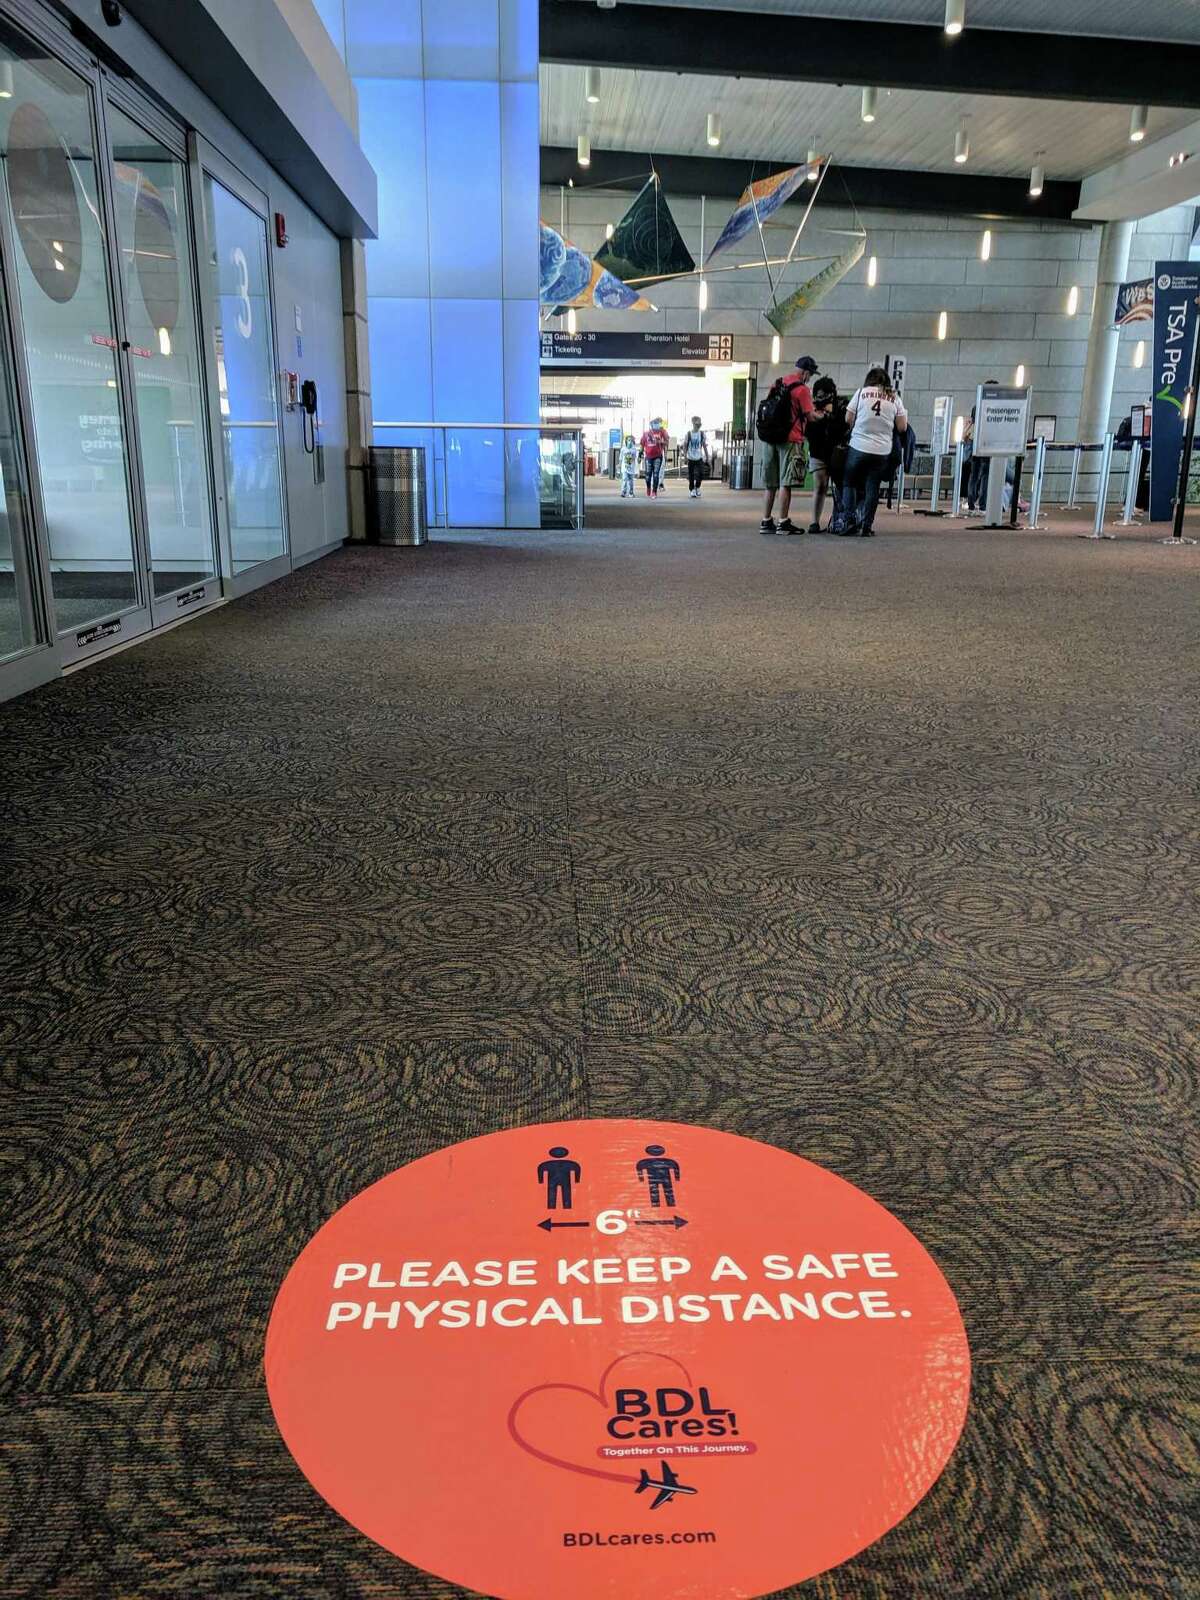 With passengers gradually returning to Bradley International Airport in Windsor Locks, Conn., there are new measures in place to keep travelers safe in the age of the coronavirus pandemic. To remind everyone to keep a safe physical distance from other individuals, the airport has installed floor markings and other graphics throughout the terminal.